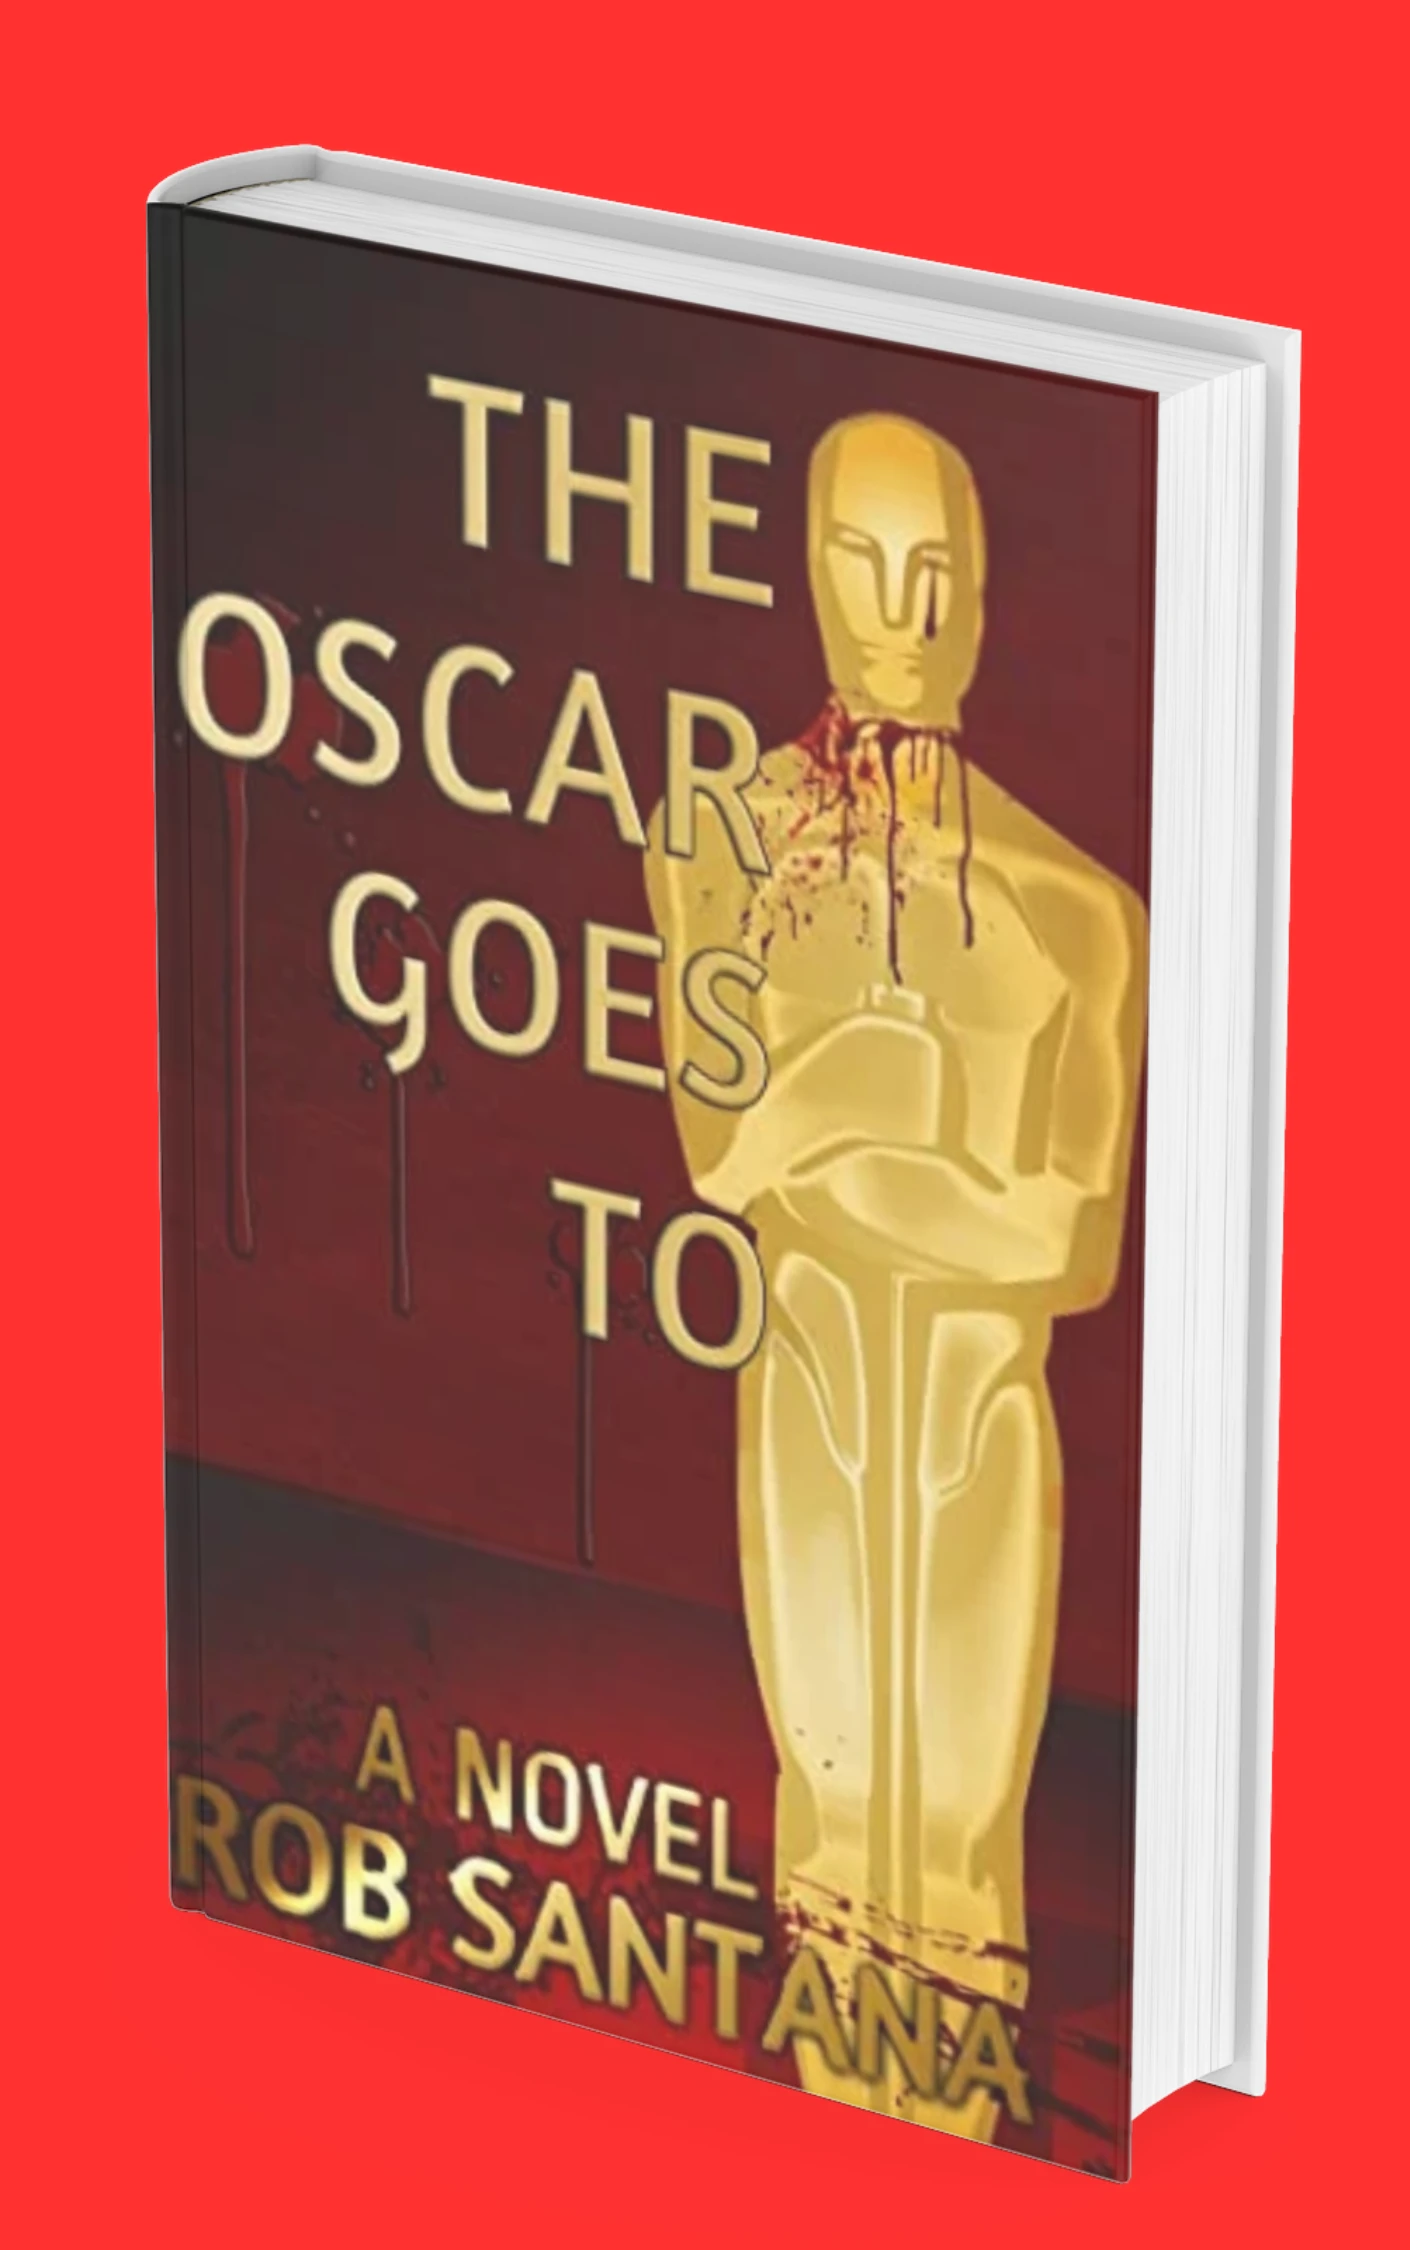 THE OSCAR GOES TO